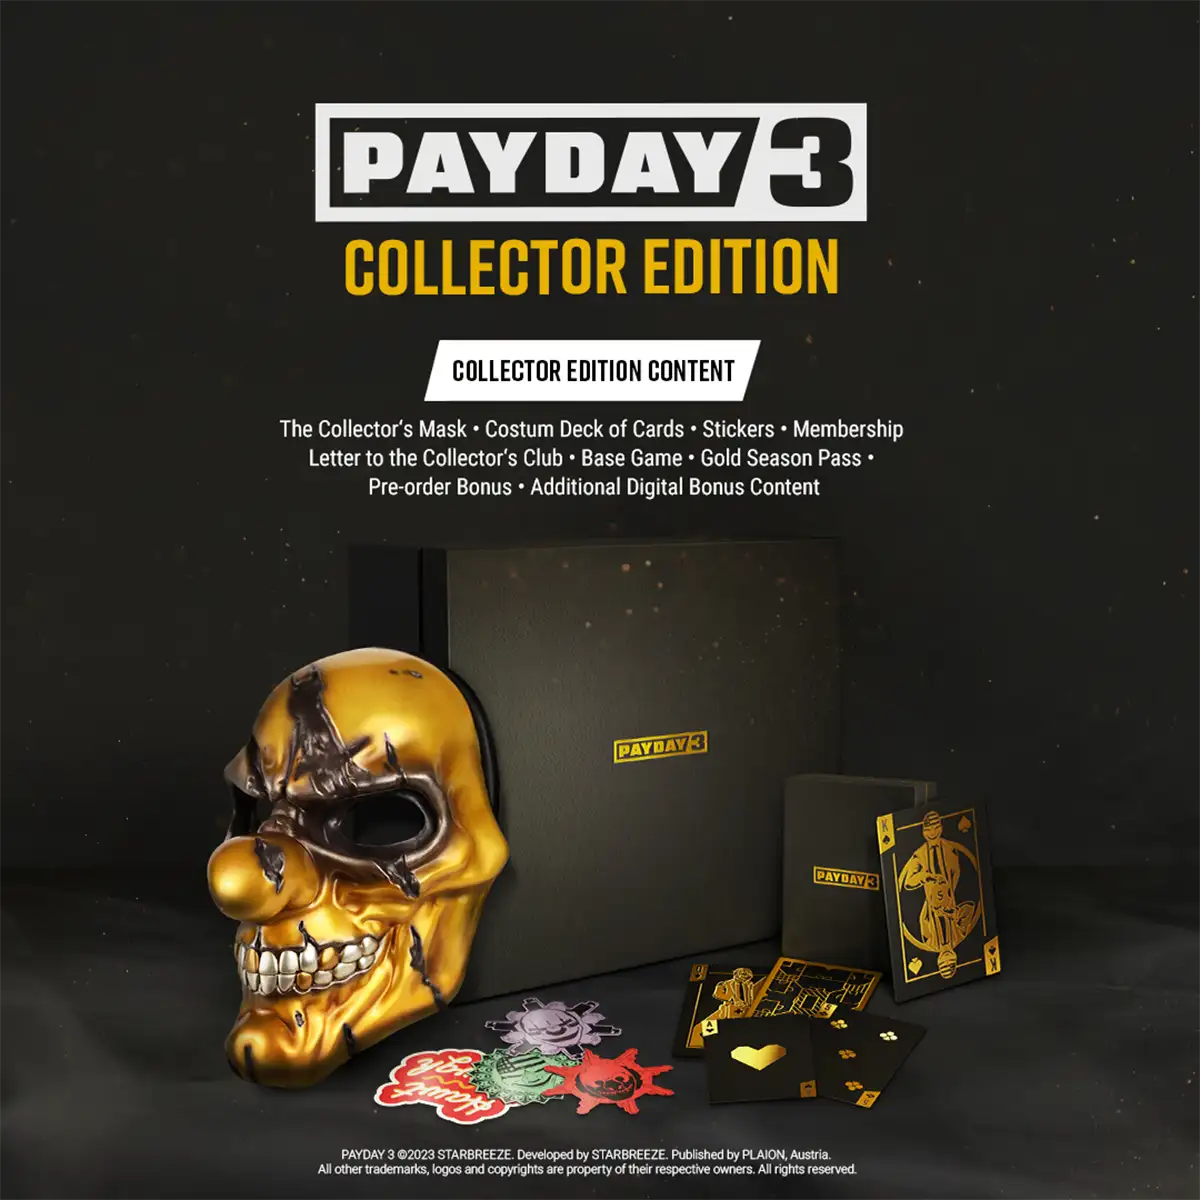 PAYDAY 3 Collector's Edition (PS5)